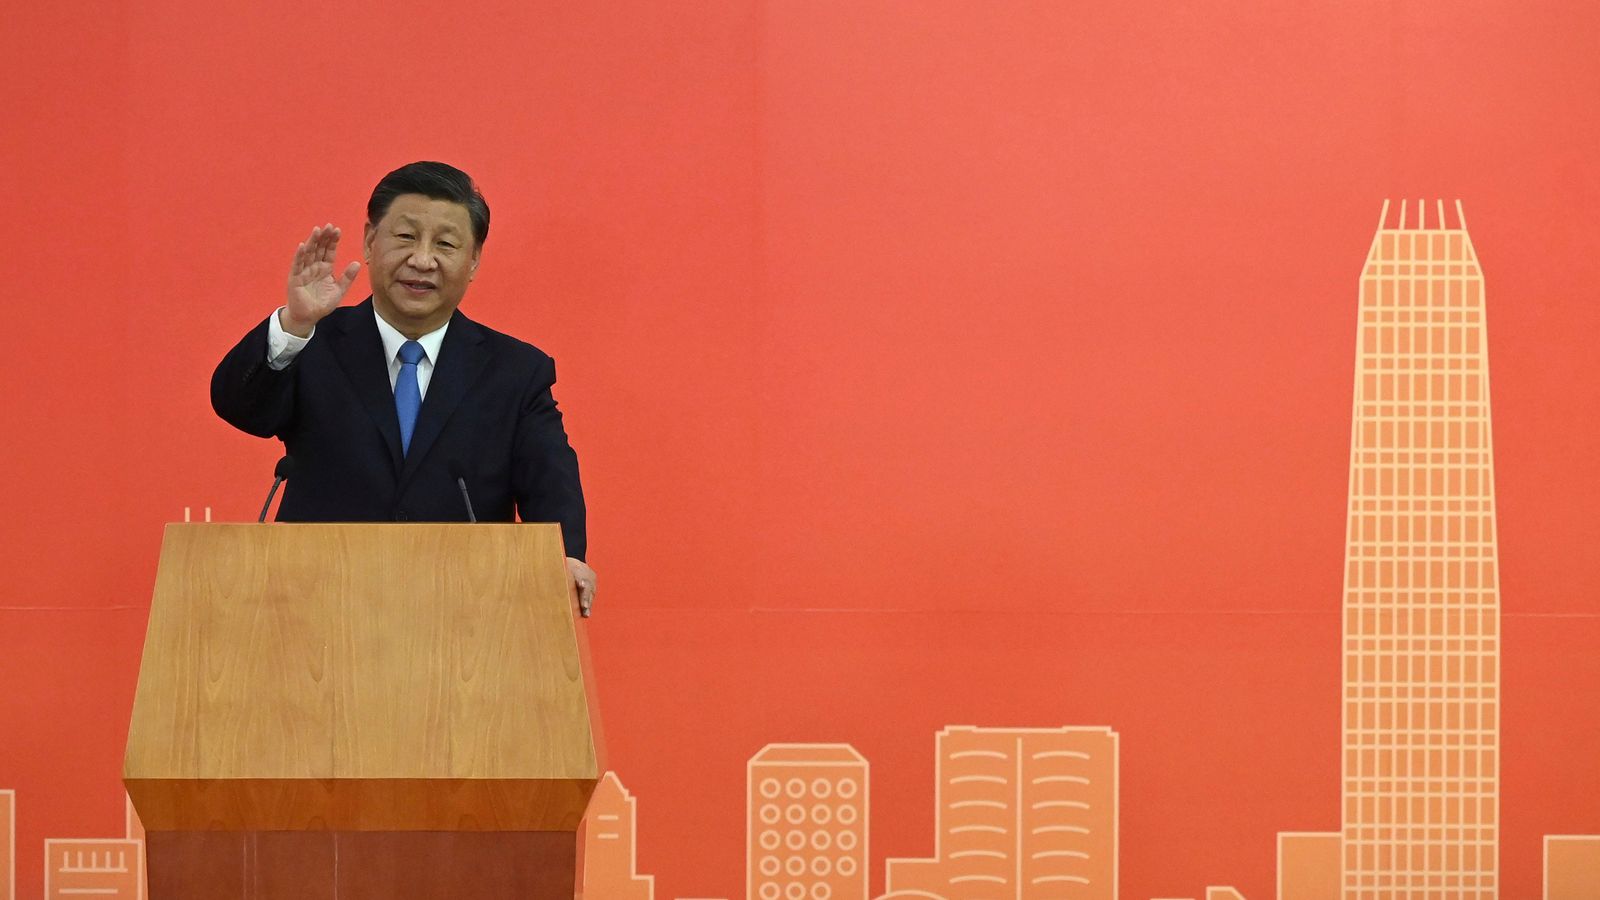 ‘Hong Kong Has Been Reborn From The Ashes’: China’s Xi Jinping Returns To A Territory Transformed